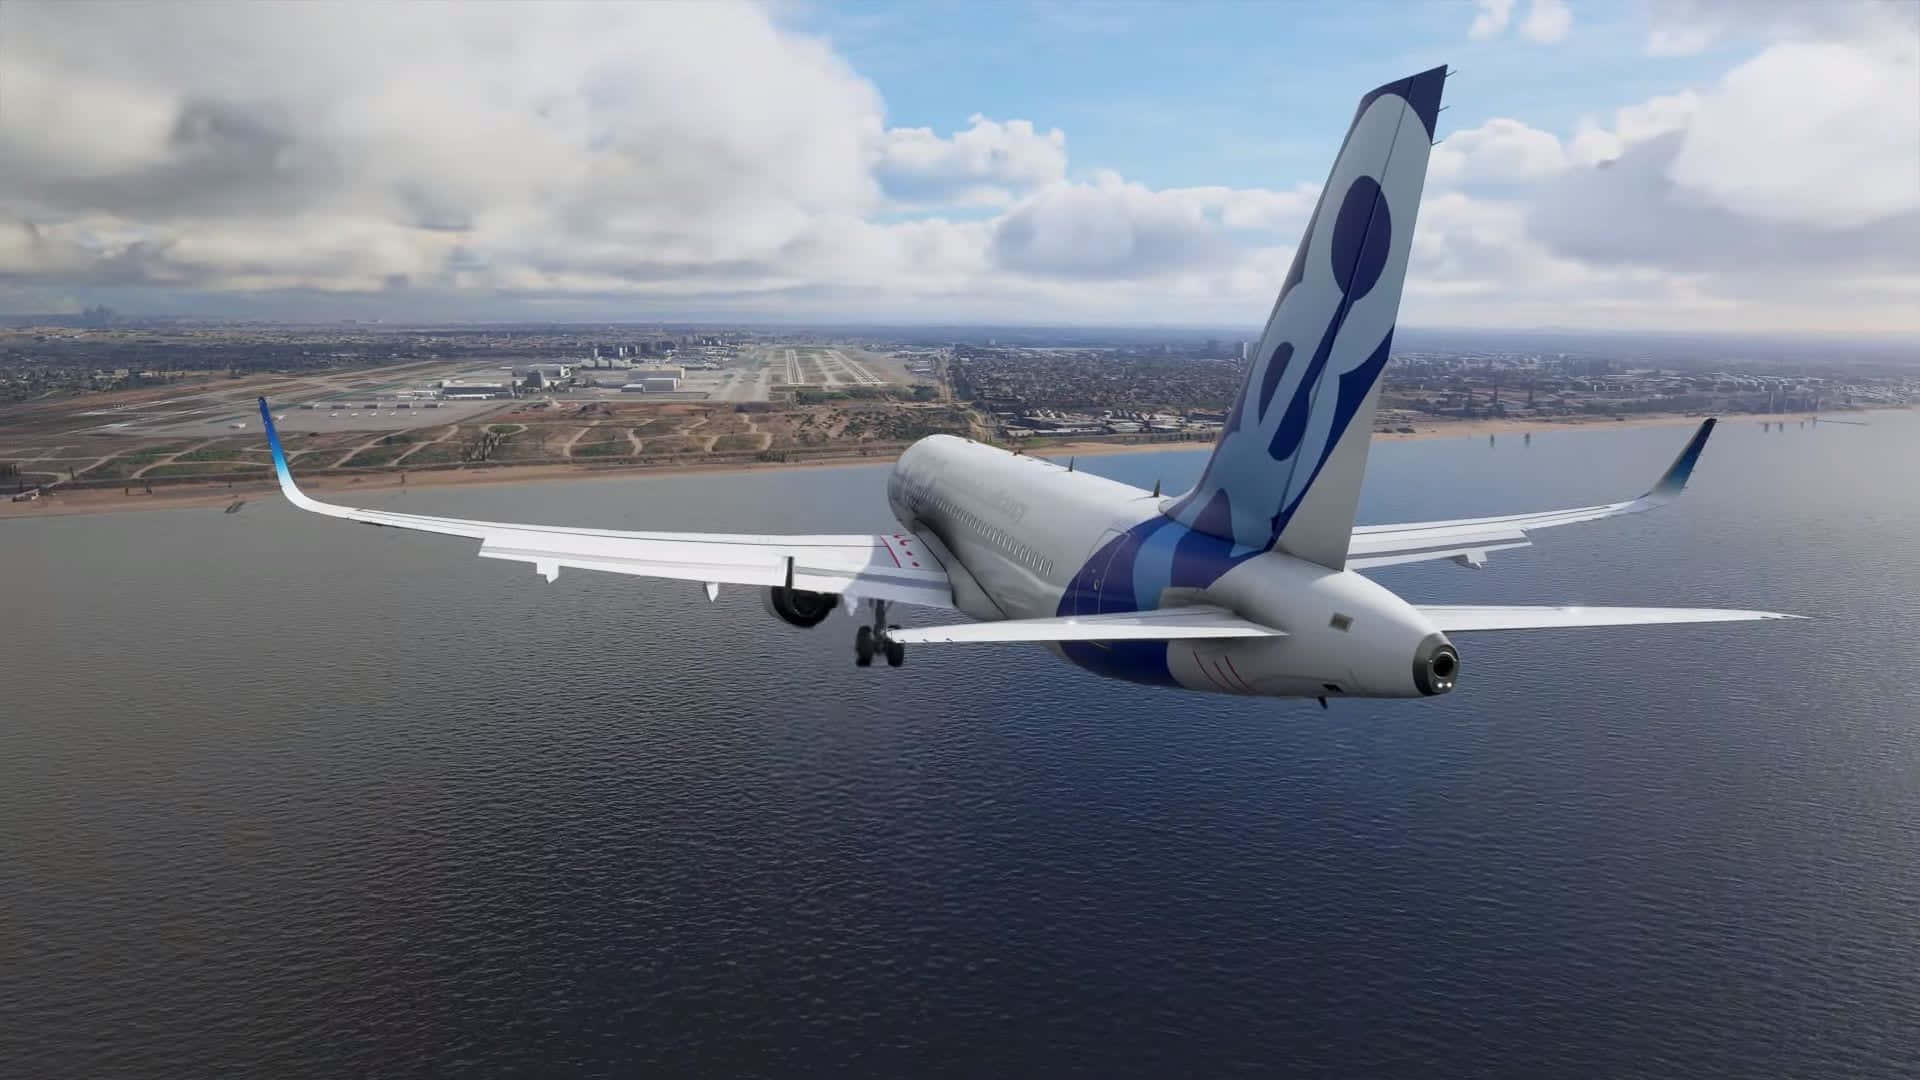 The Ultimate Flying Adventure with Microsoft Flight Simulator